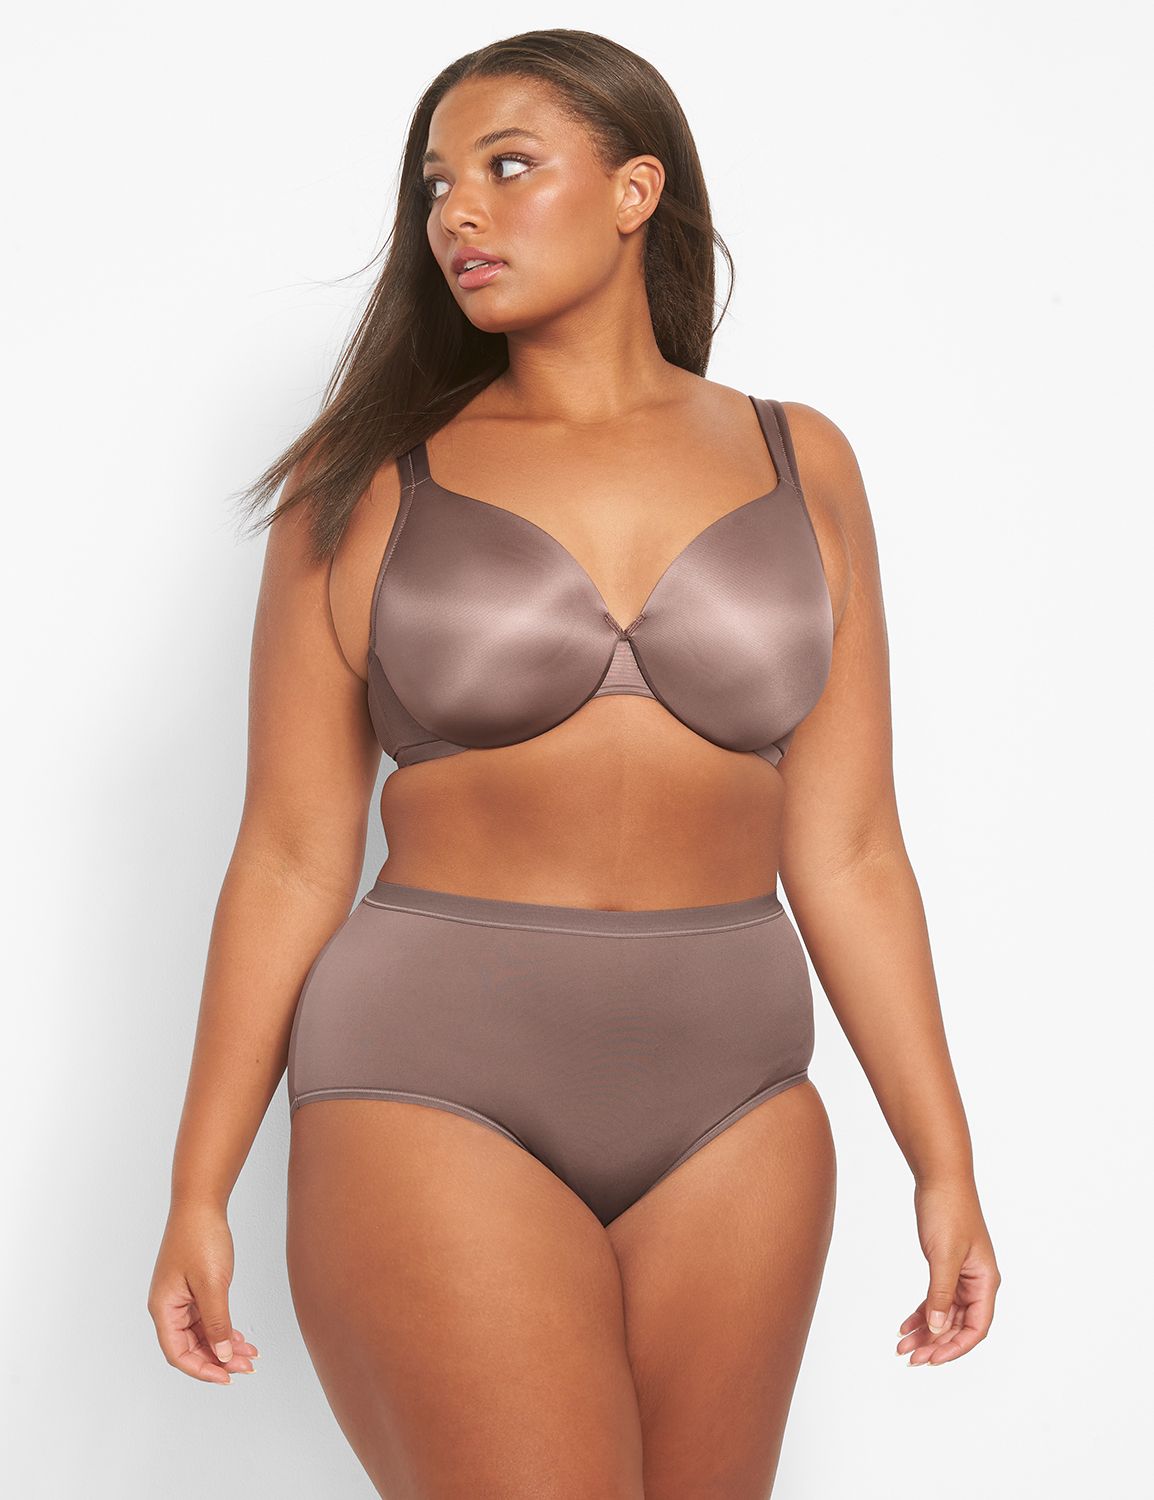 Lane Bryant - The bra that looks every bit as blissful as